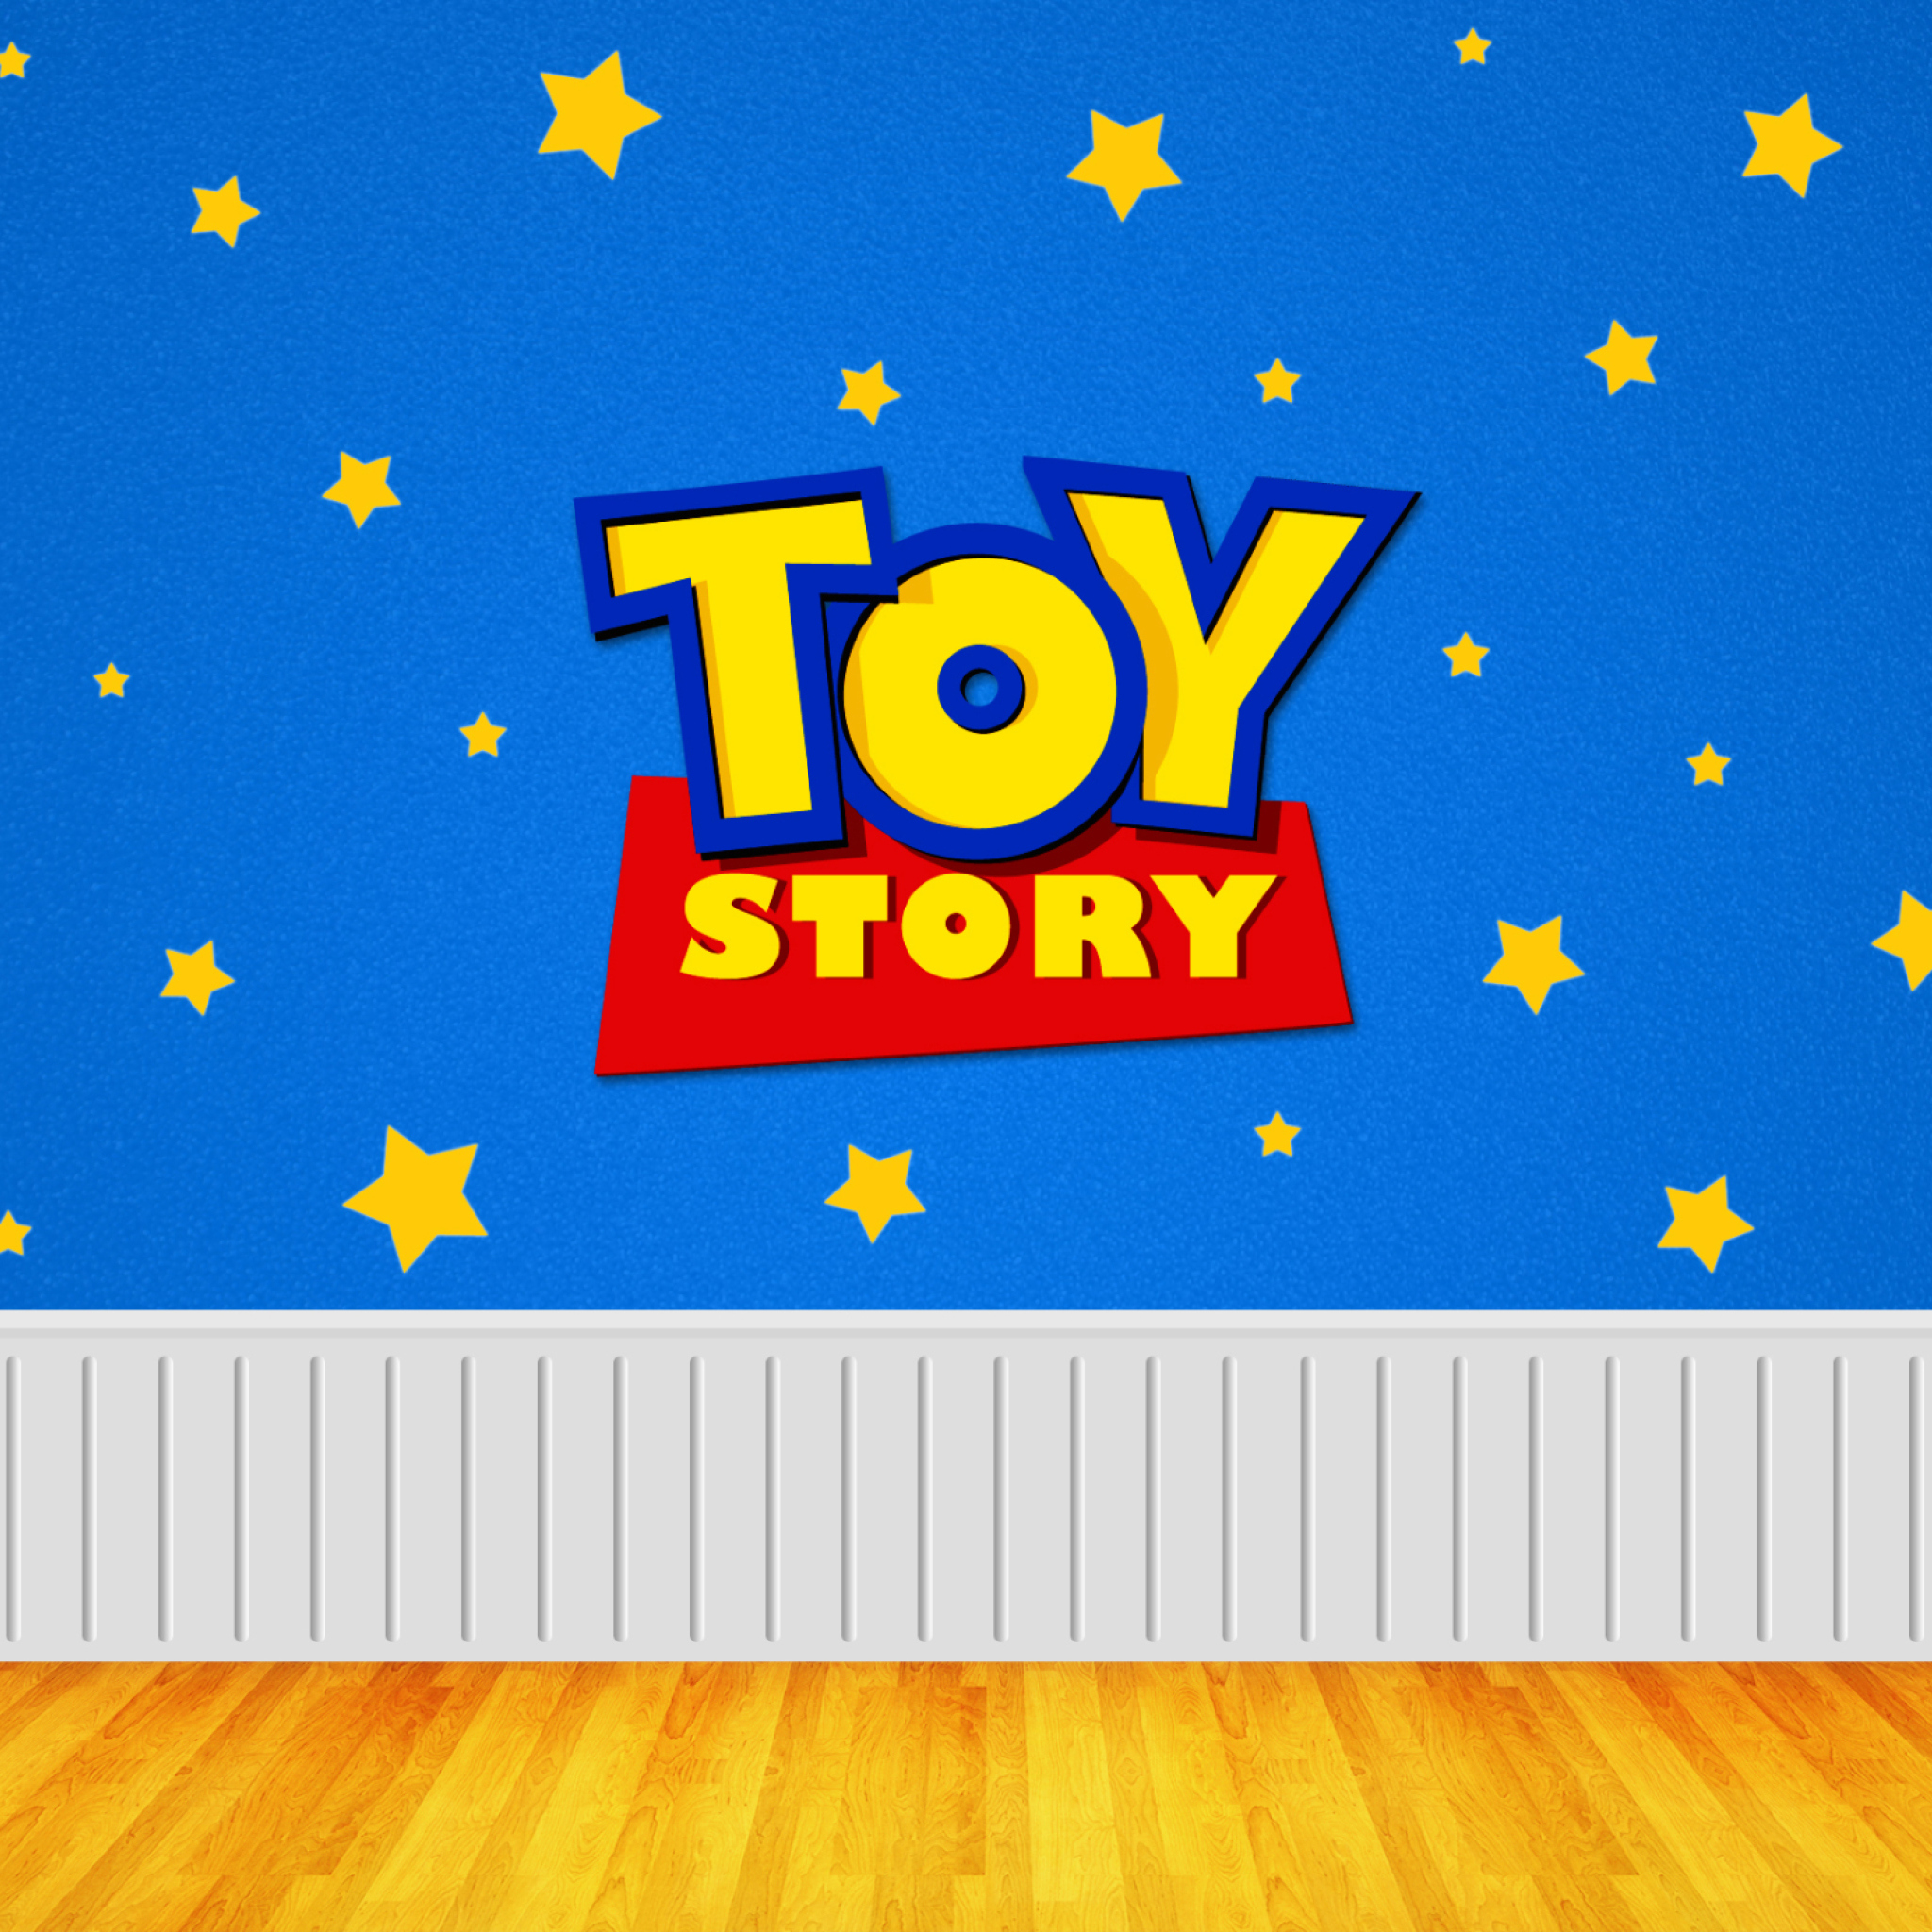 Шрифт Toy story